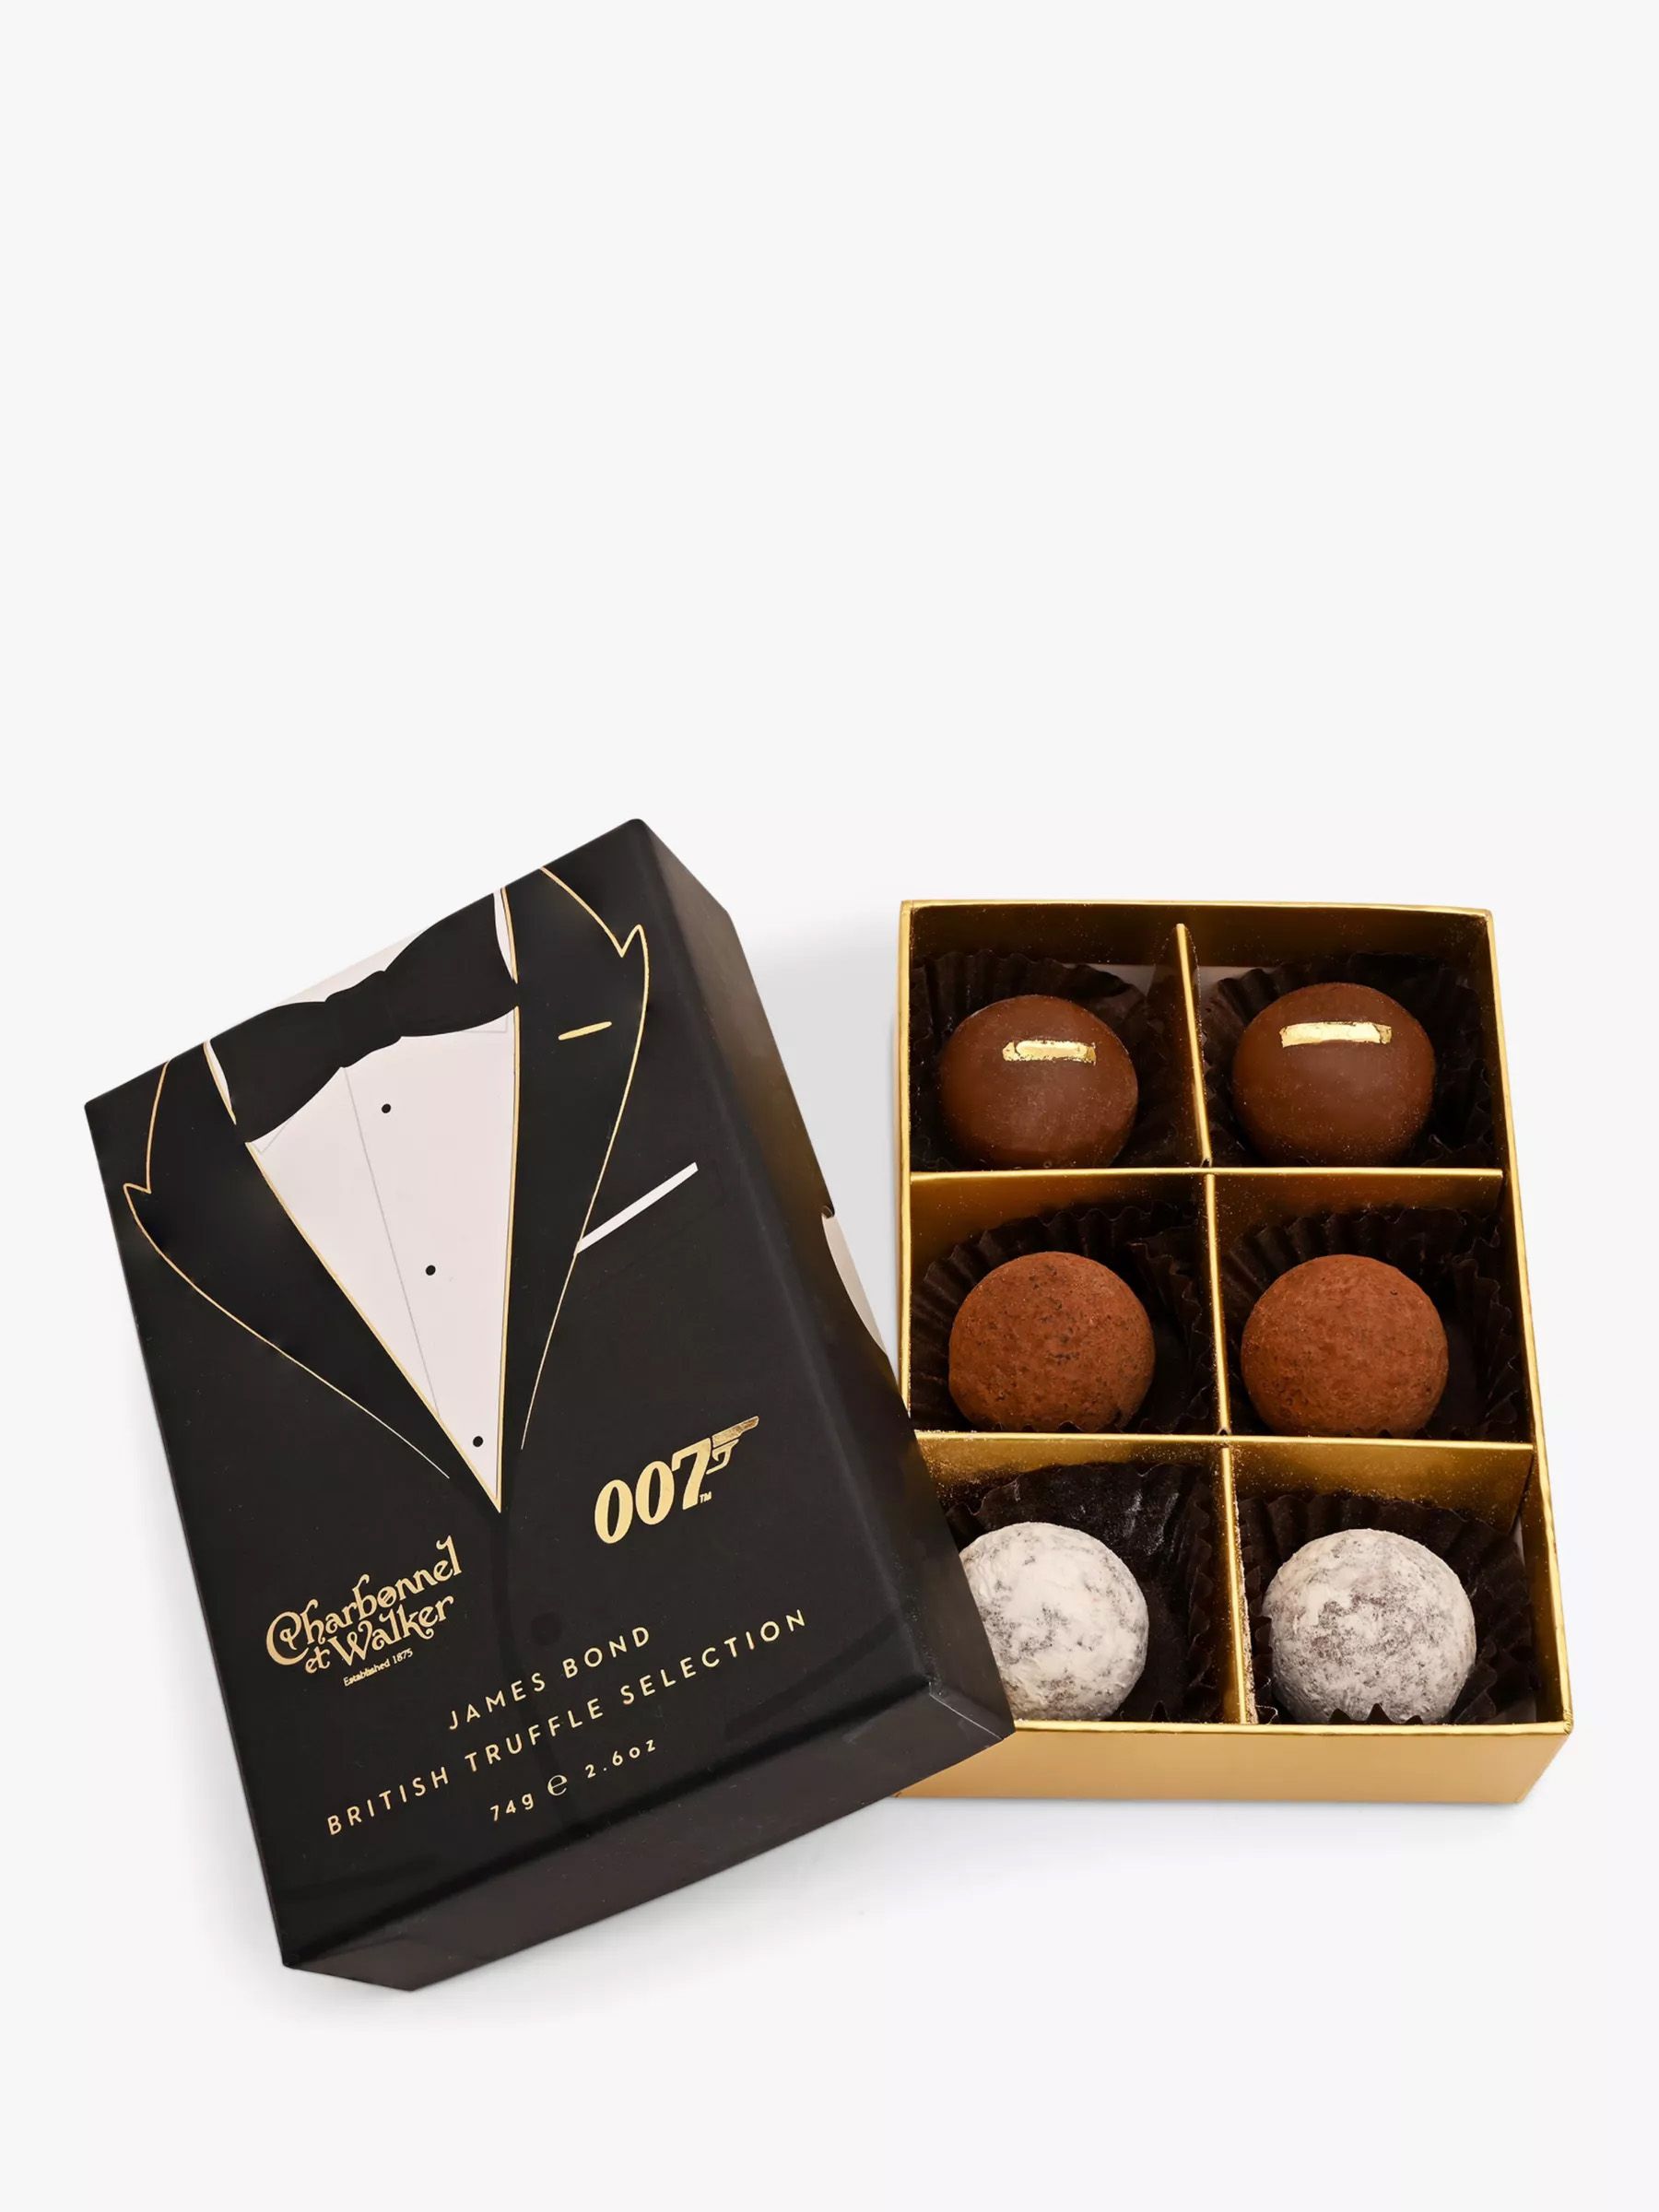 Box of chocolates in a James Bond suit styled box